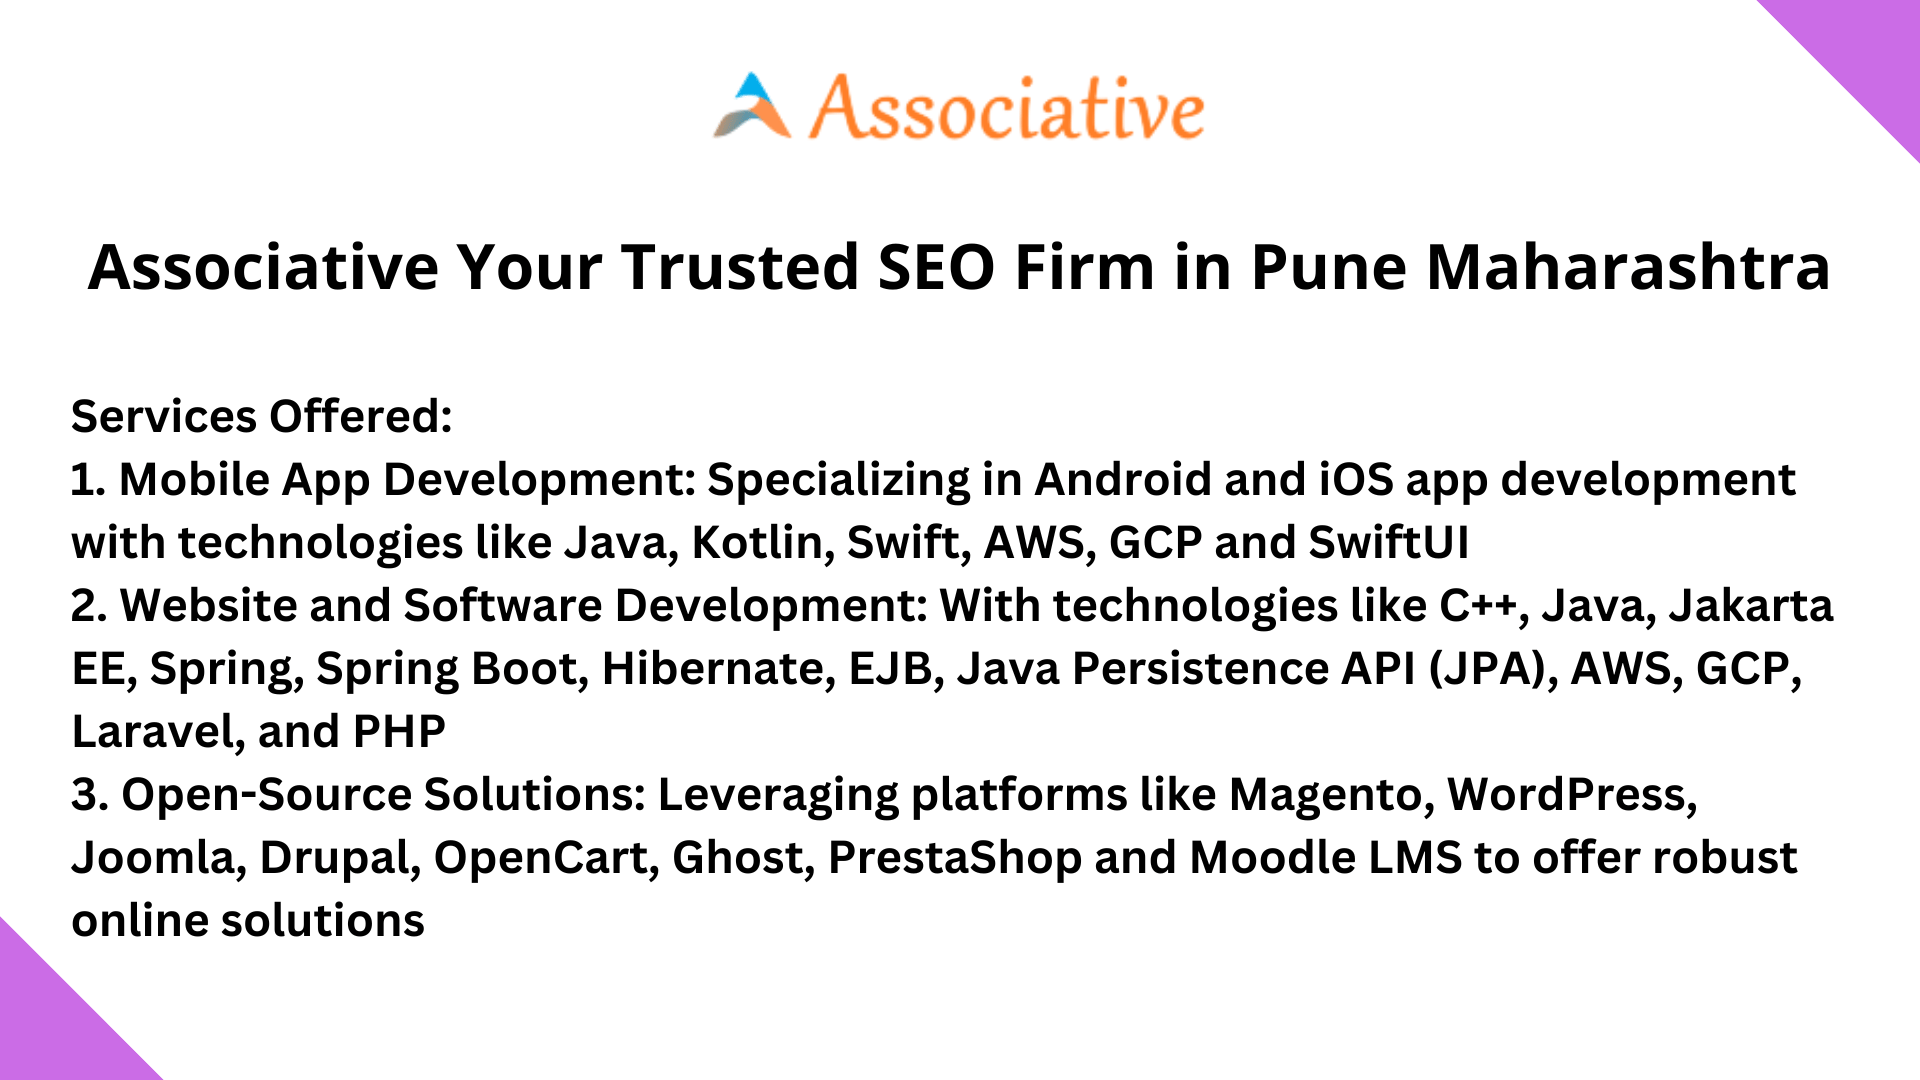 Associative Your Trusted SEO Firm in Pune Maharashtra